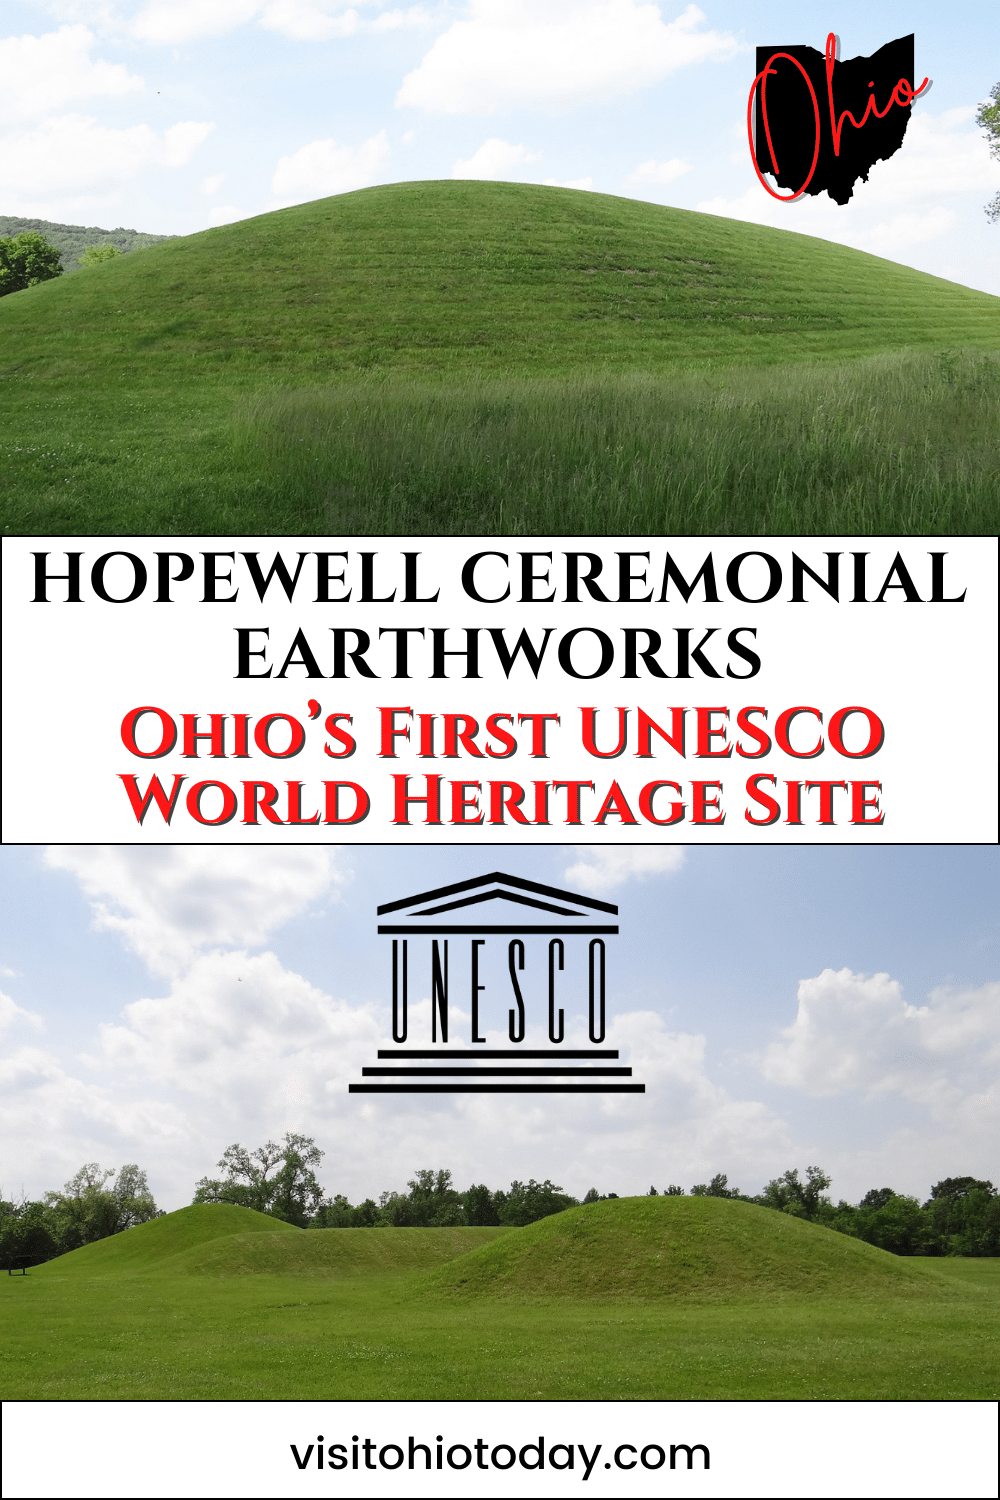 The Hopewell Ceremonial Earthworks have become Ohio’s first World Heritage Site and the 25th World Heritage Listing in the United States.